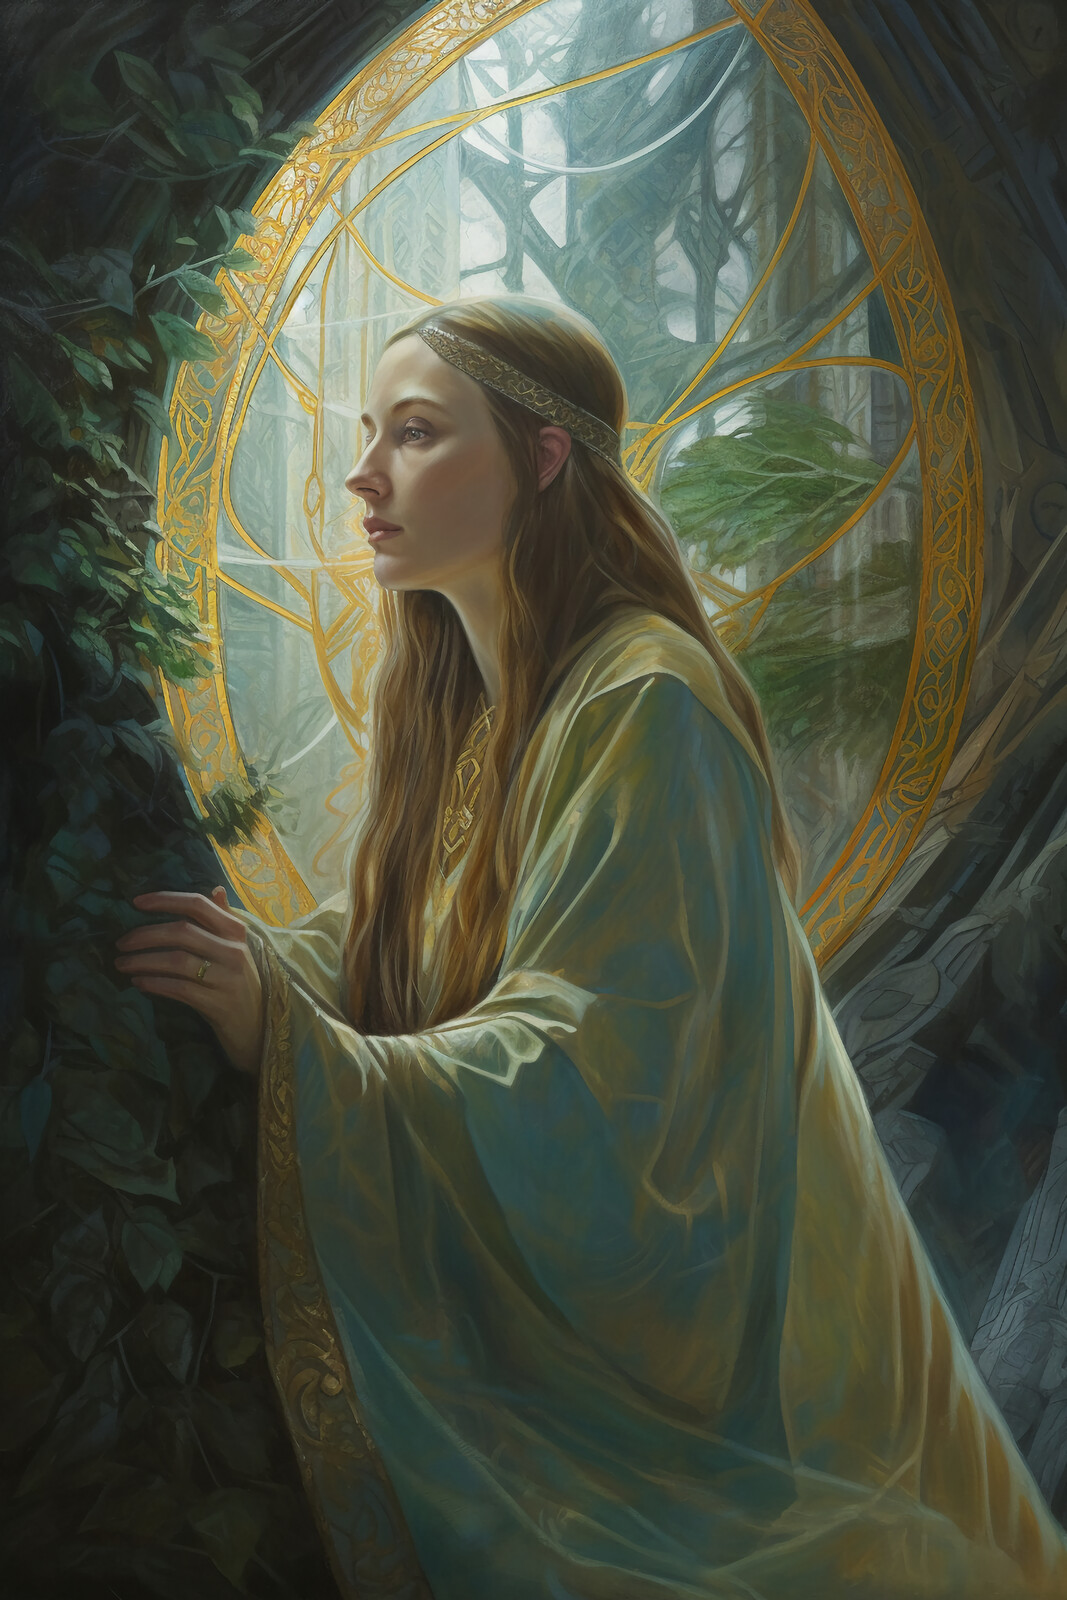 Yavanna, Queen of the Earth